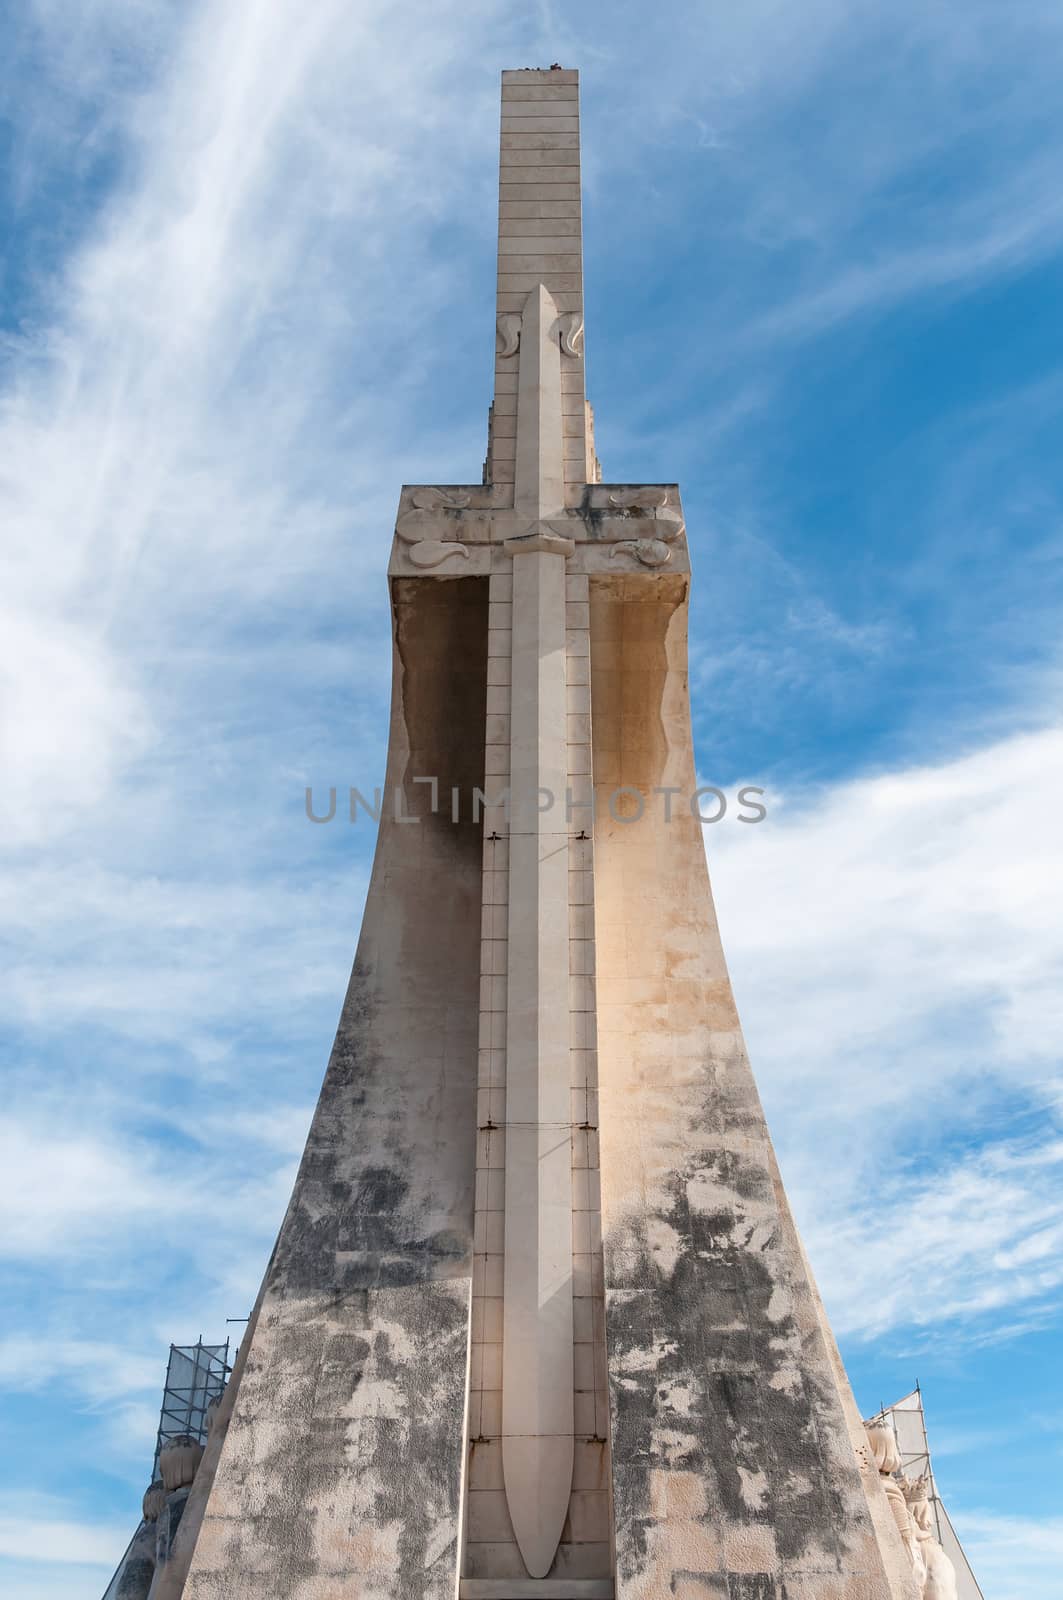 Monument to the Discoveries  on the northern bank of the Tagus River in Lisbon